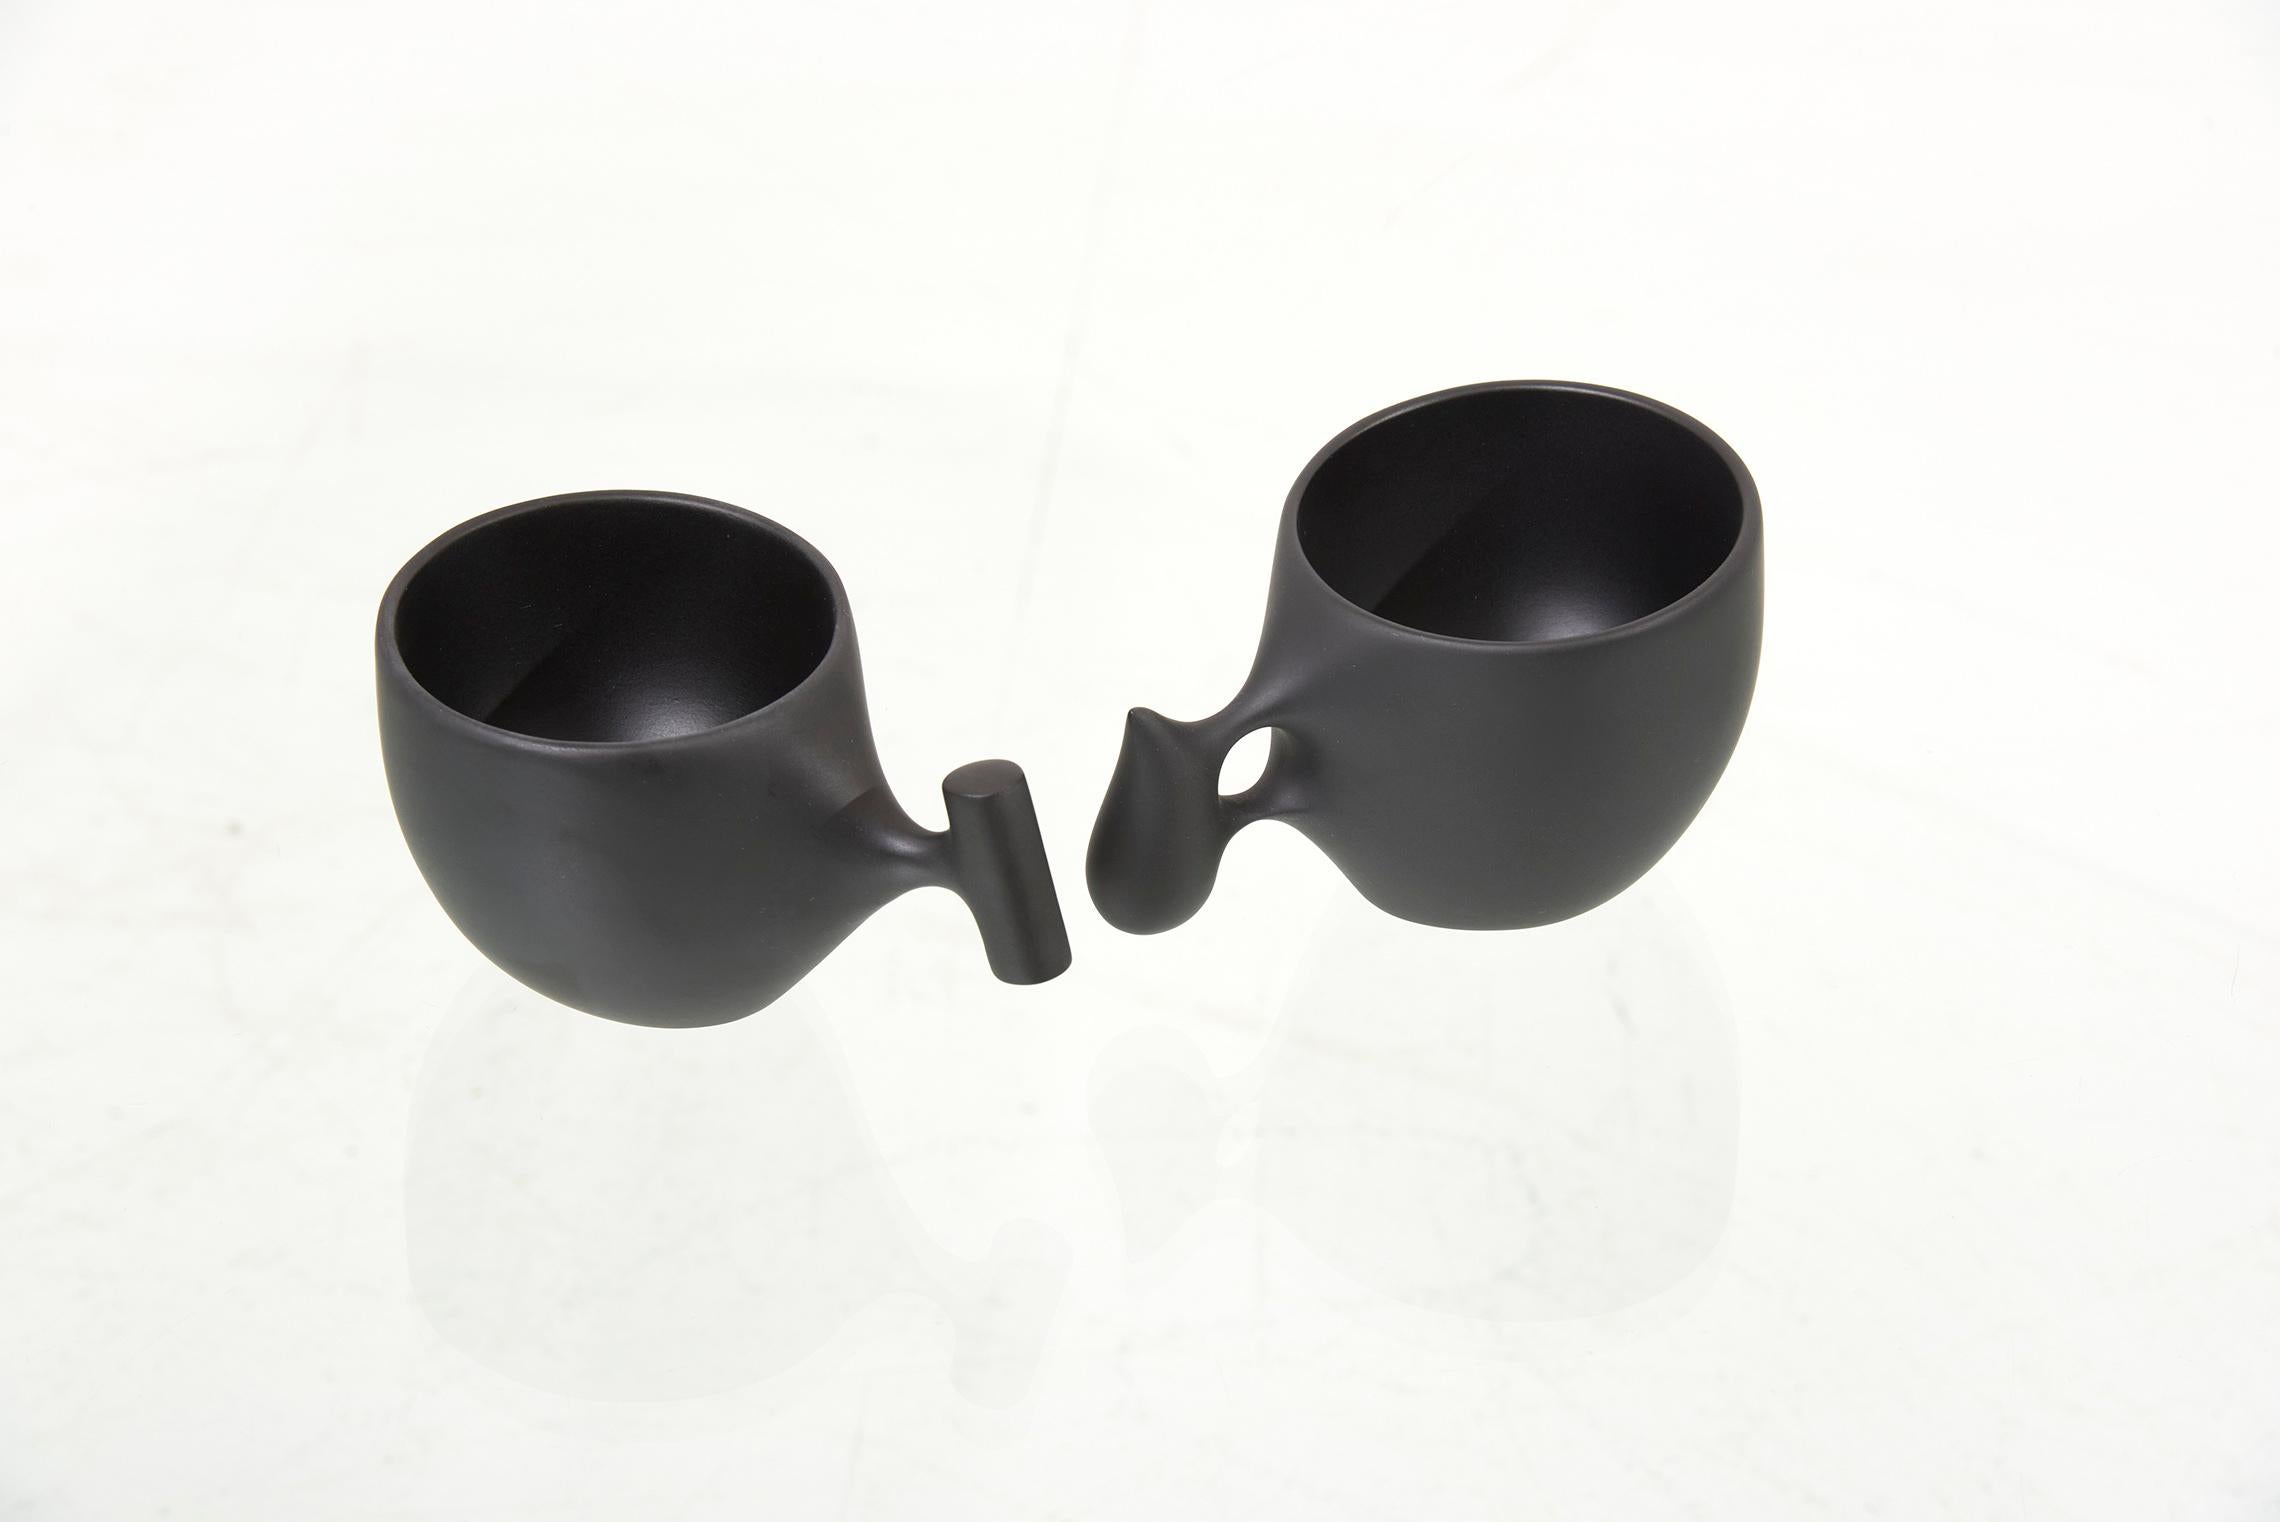 Wood Set of Hand-Crafted Mugs, Coffee Scoop and Tong by Hokuto Sekine, Japan, 2021 For Sale